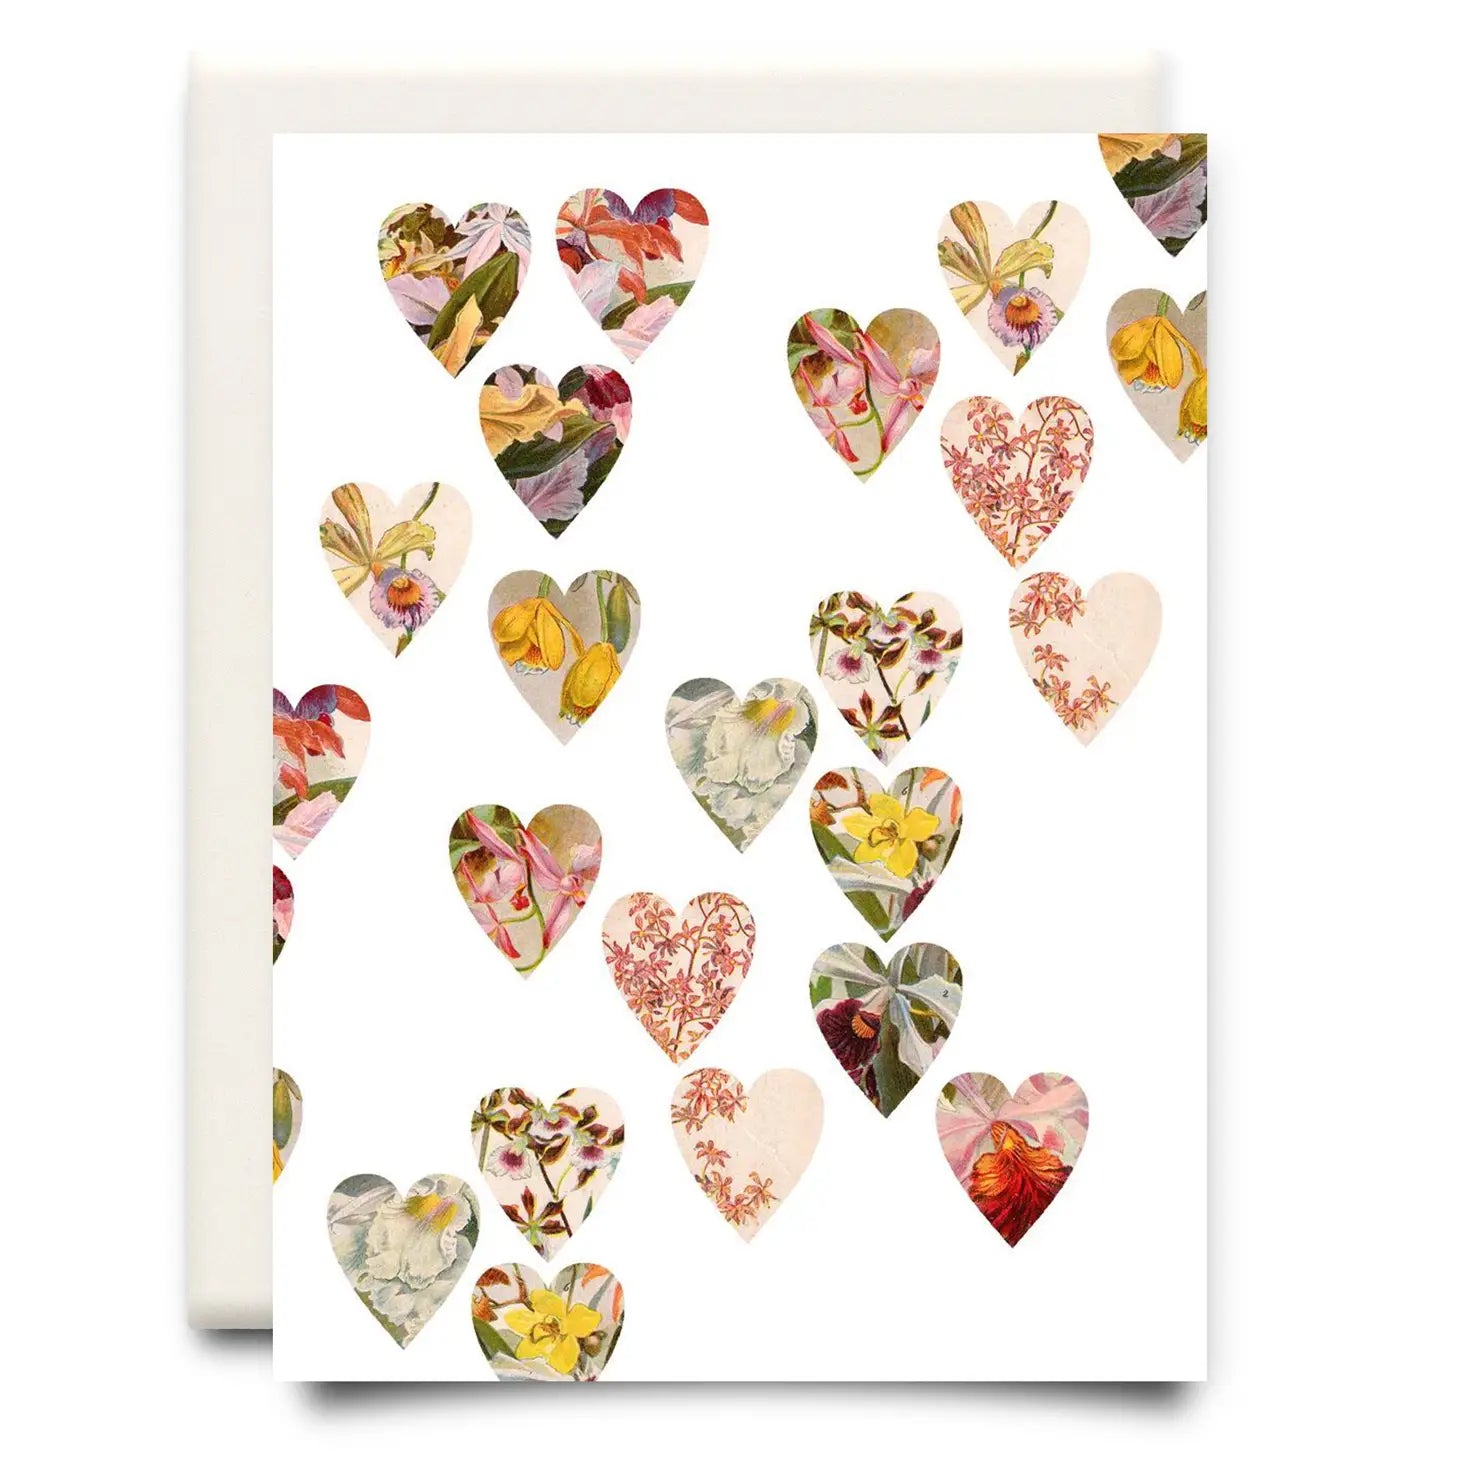 Inkwell Cards “Hearts Collage” Card